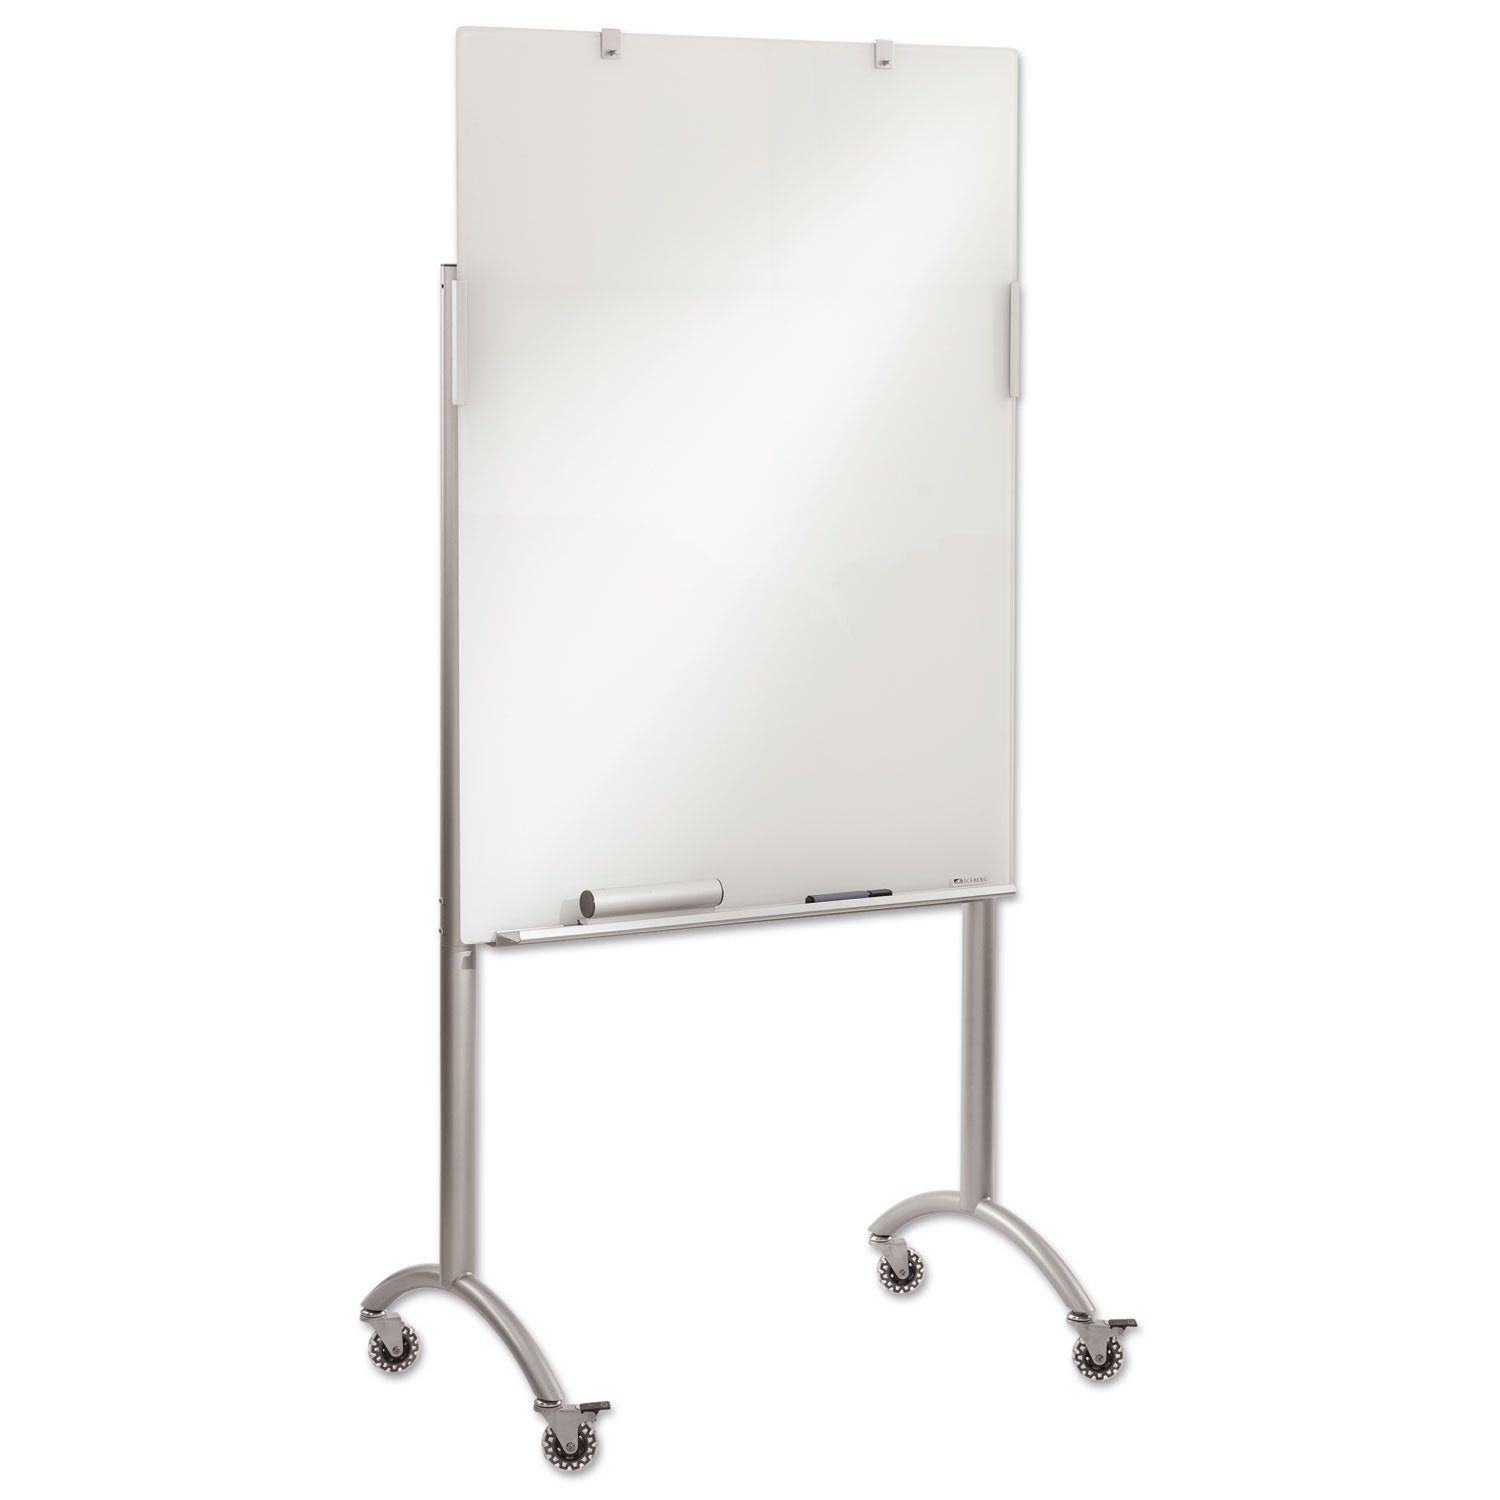 Clarity Mobile Easel with Integrated Glass Marker Board, 36 x 48 x 72, Steel - 